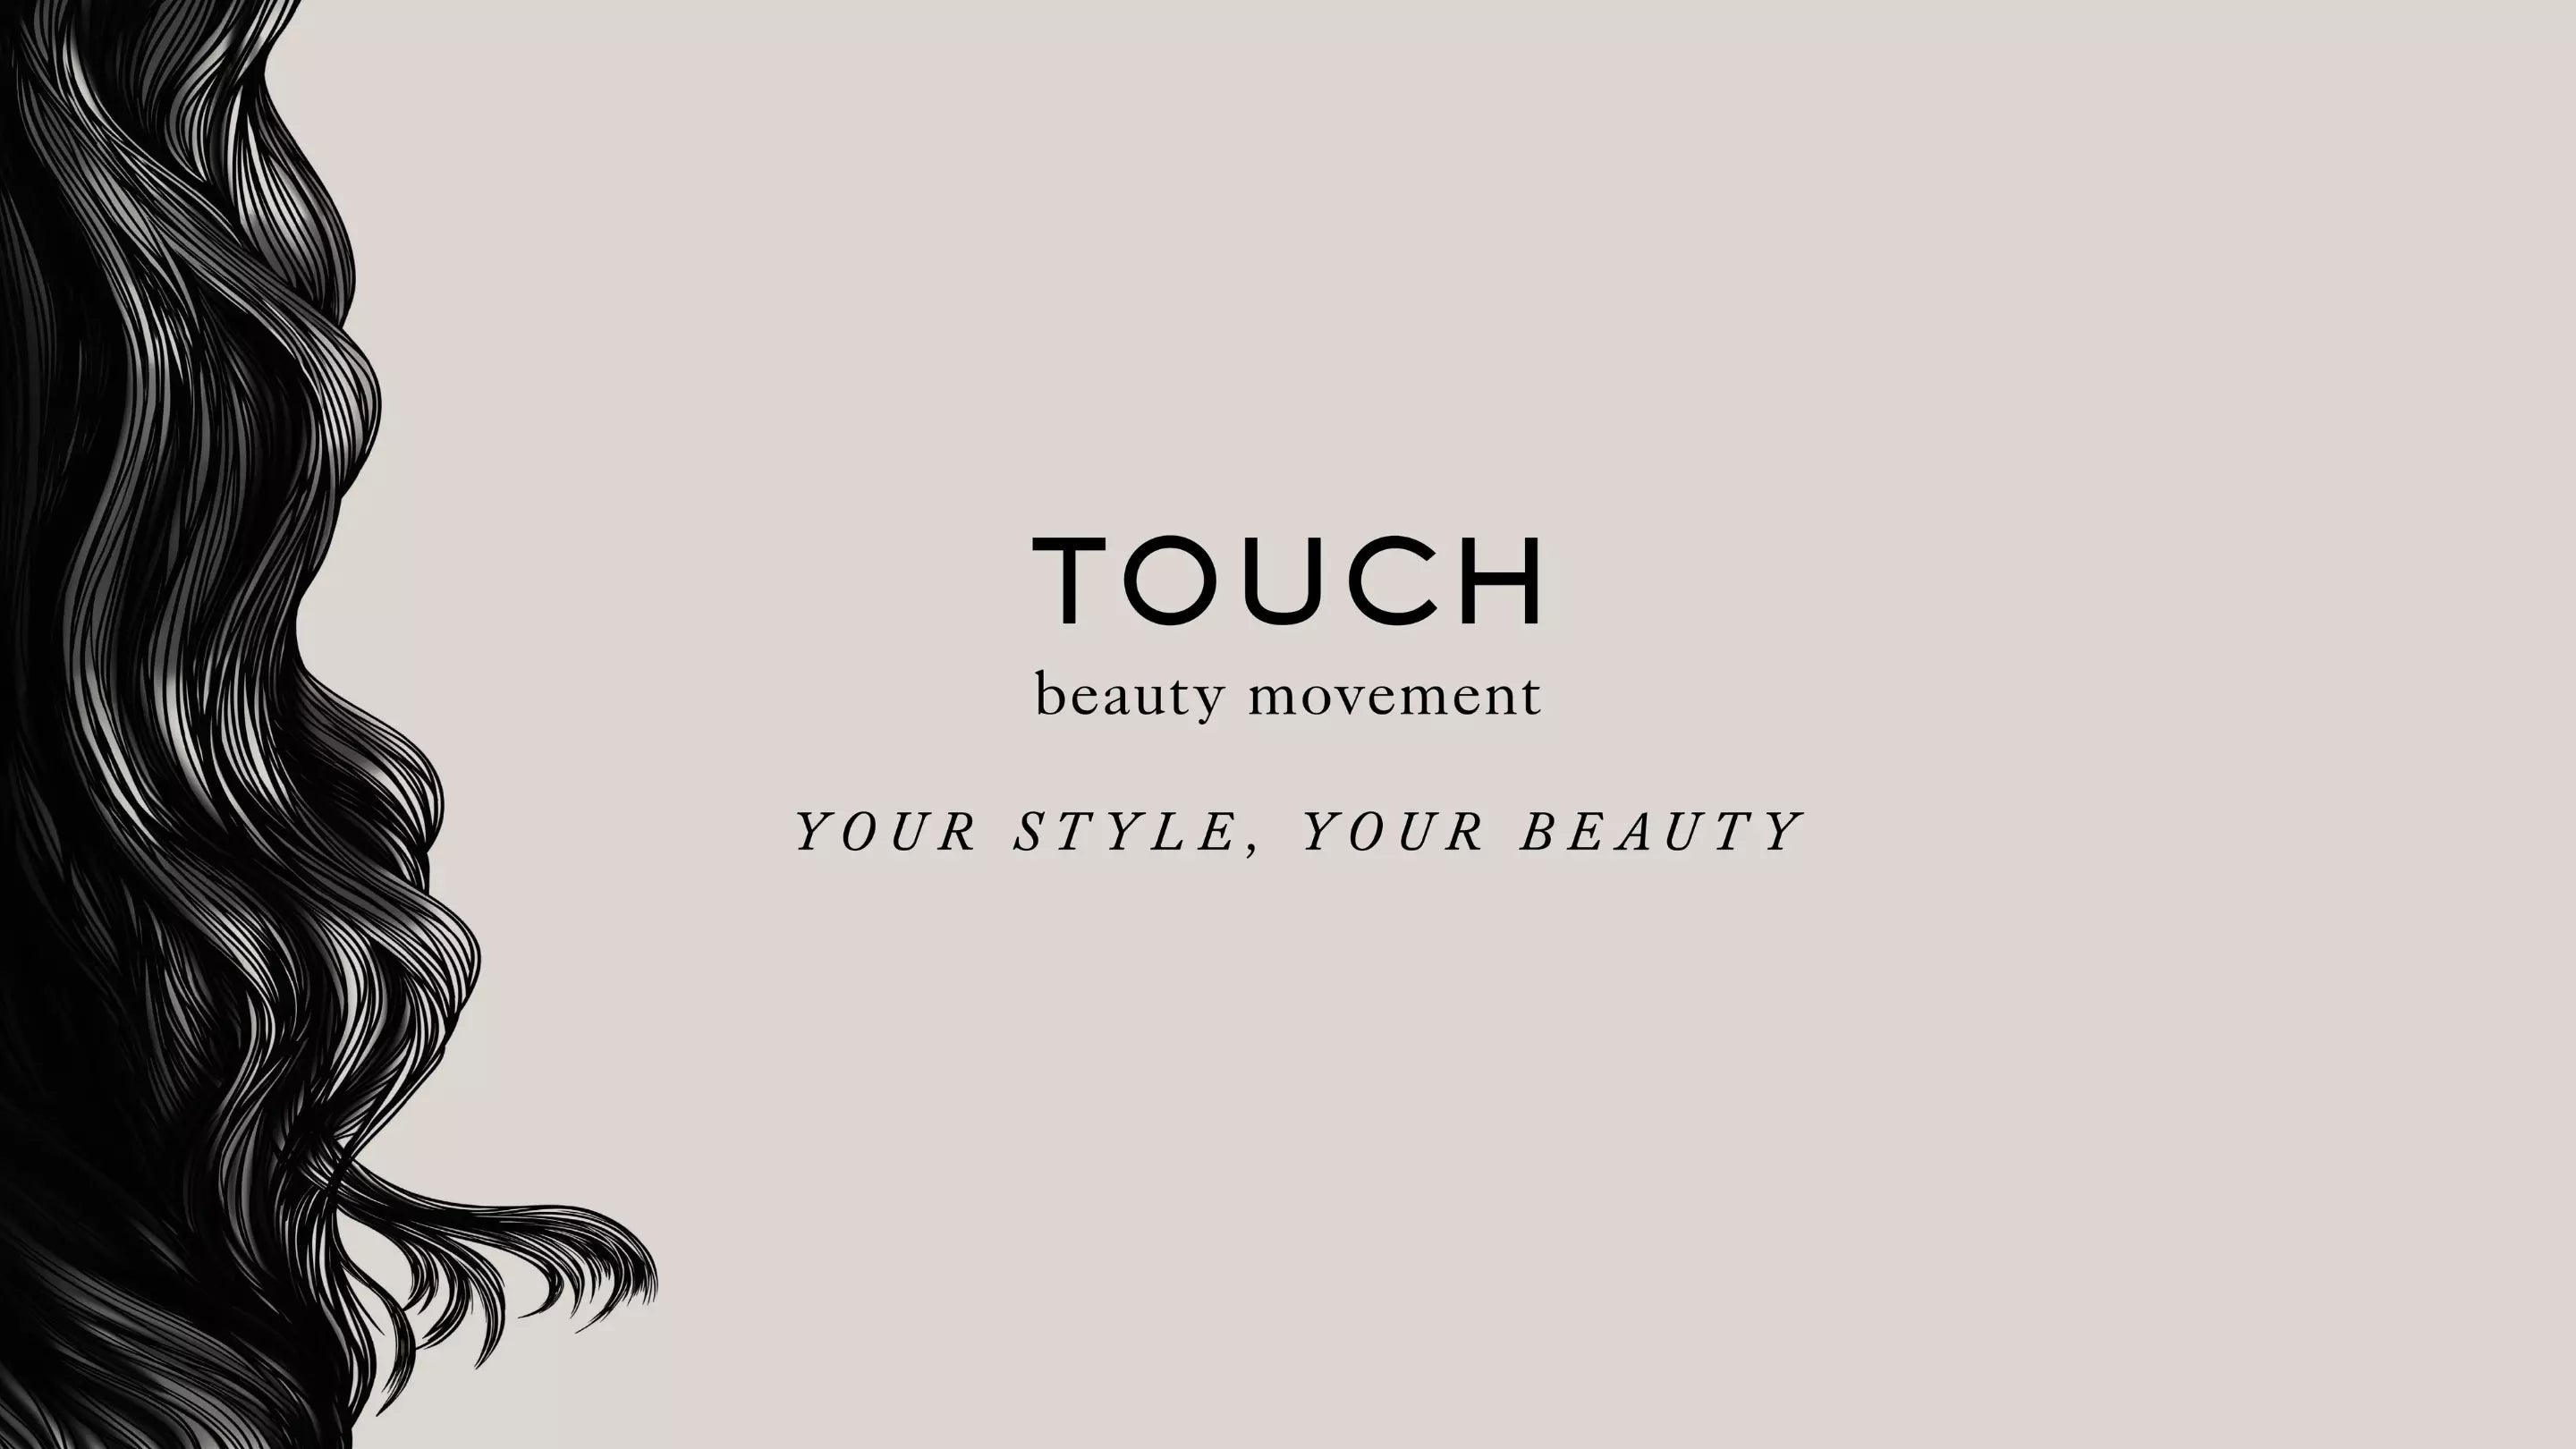 TOUCH BANNER YOUR STYLE YOUR BEAUTY 